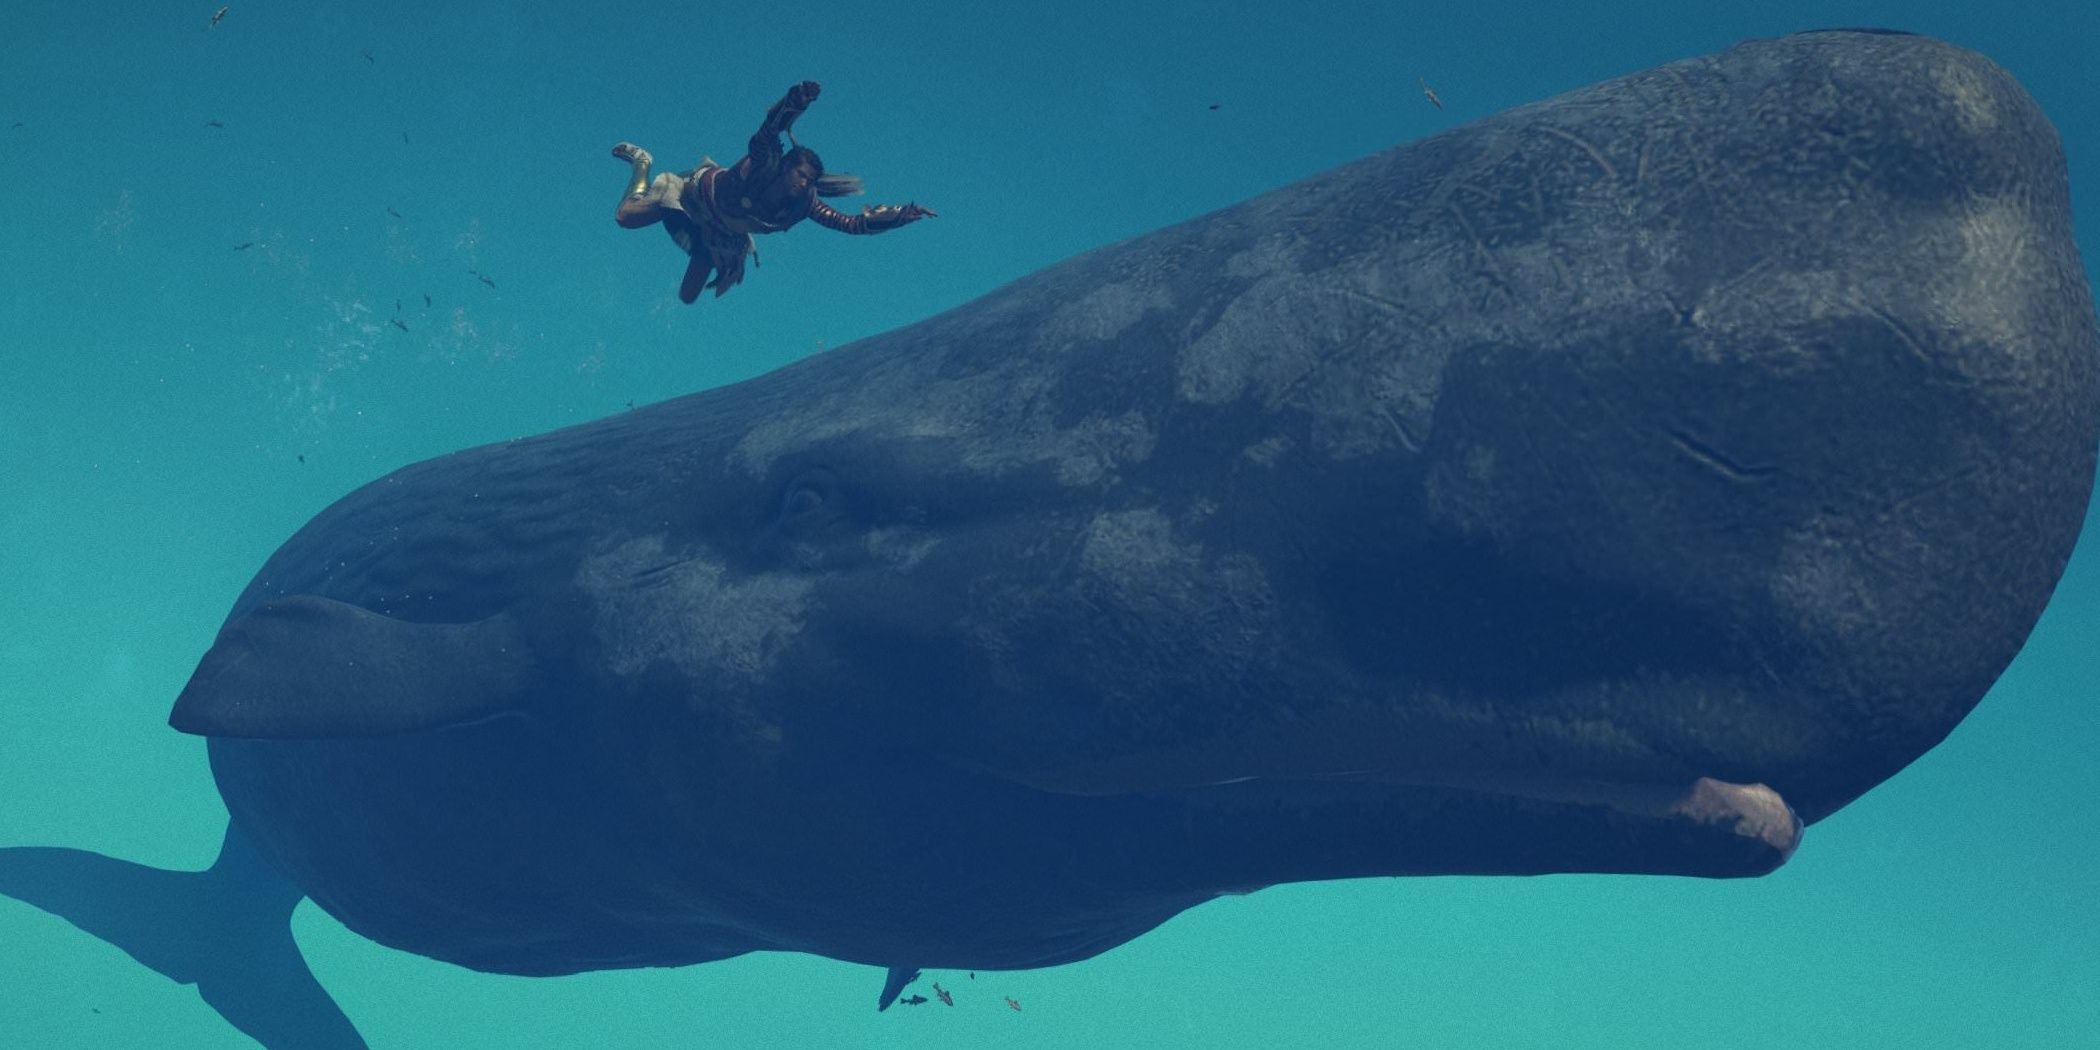 The player swimming underwater next to a whale in Assassin's Creed Odyssey